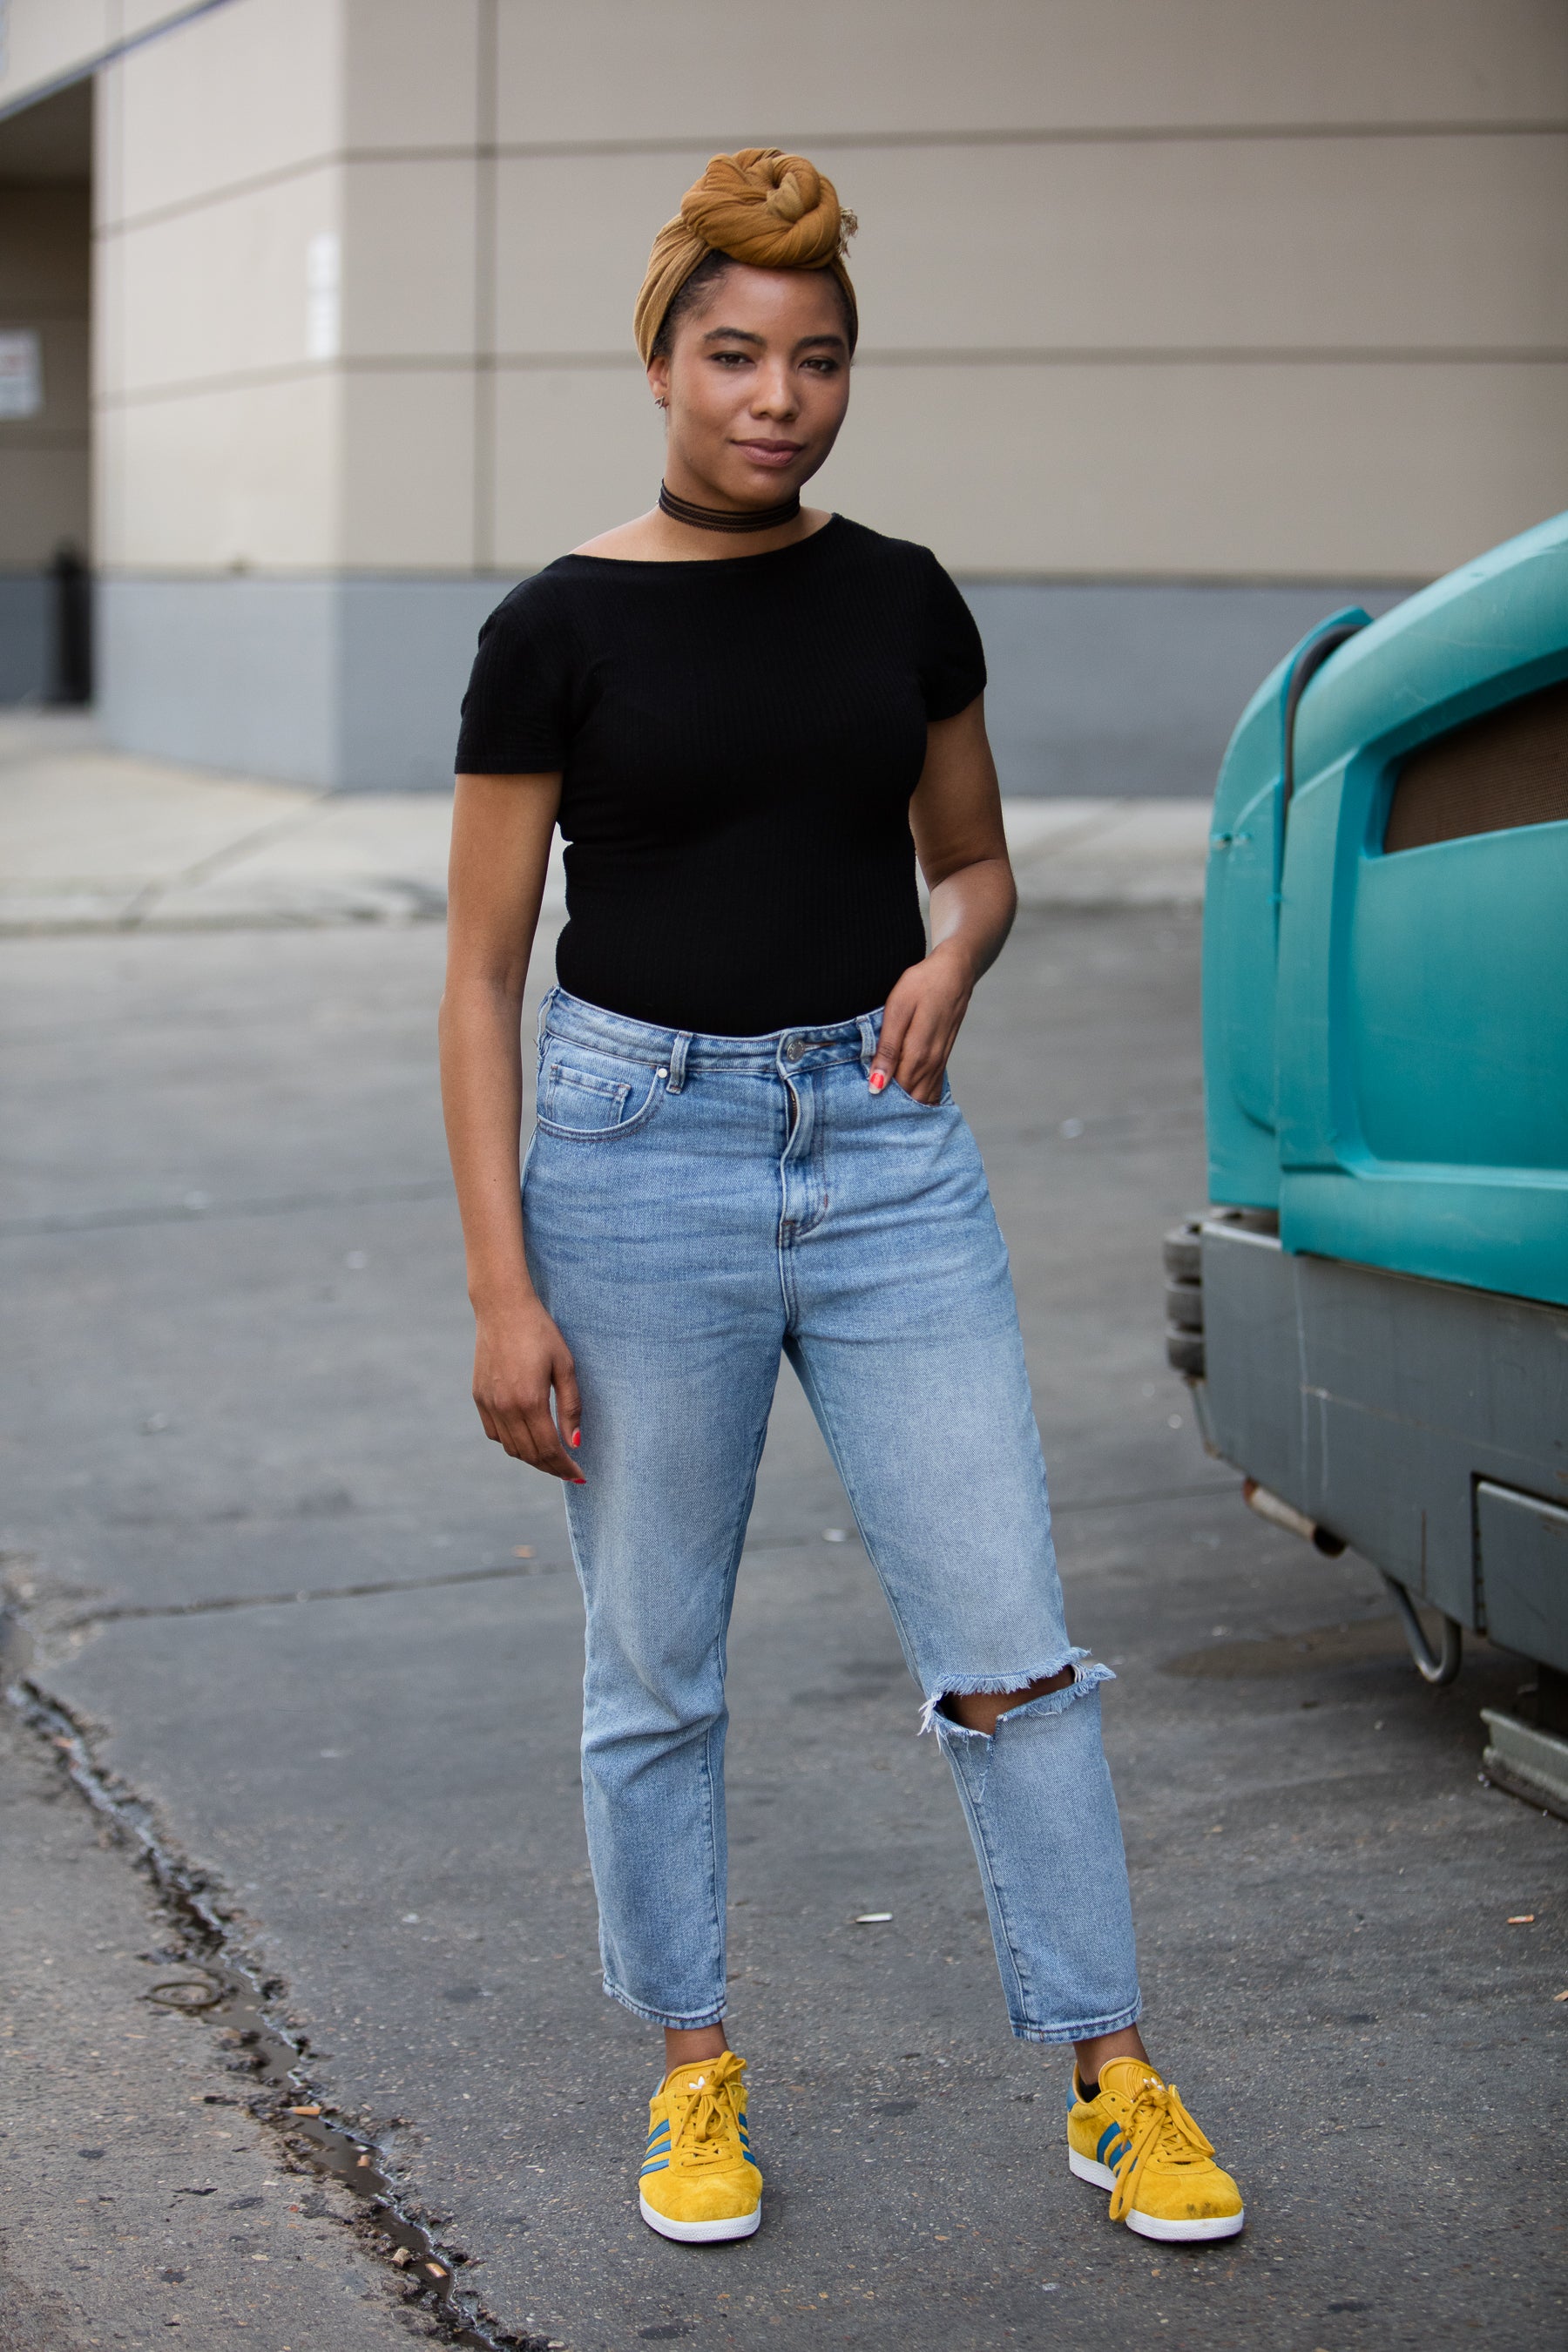 The Street Style Looks That Took ESSENCE Festival 2017 By Storm